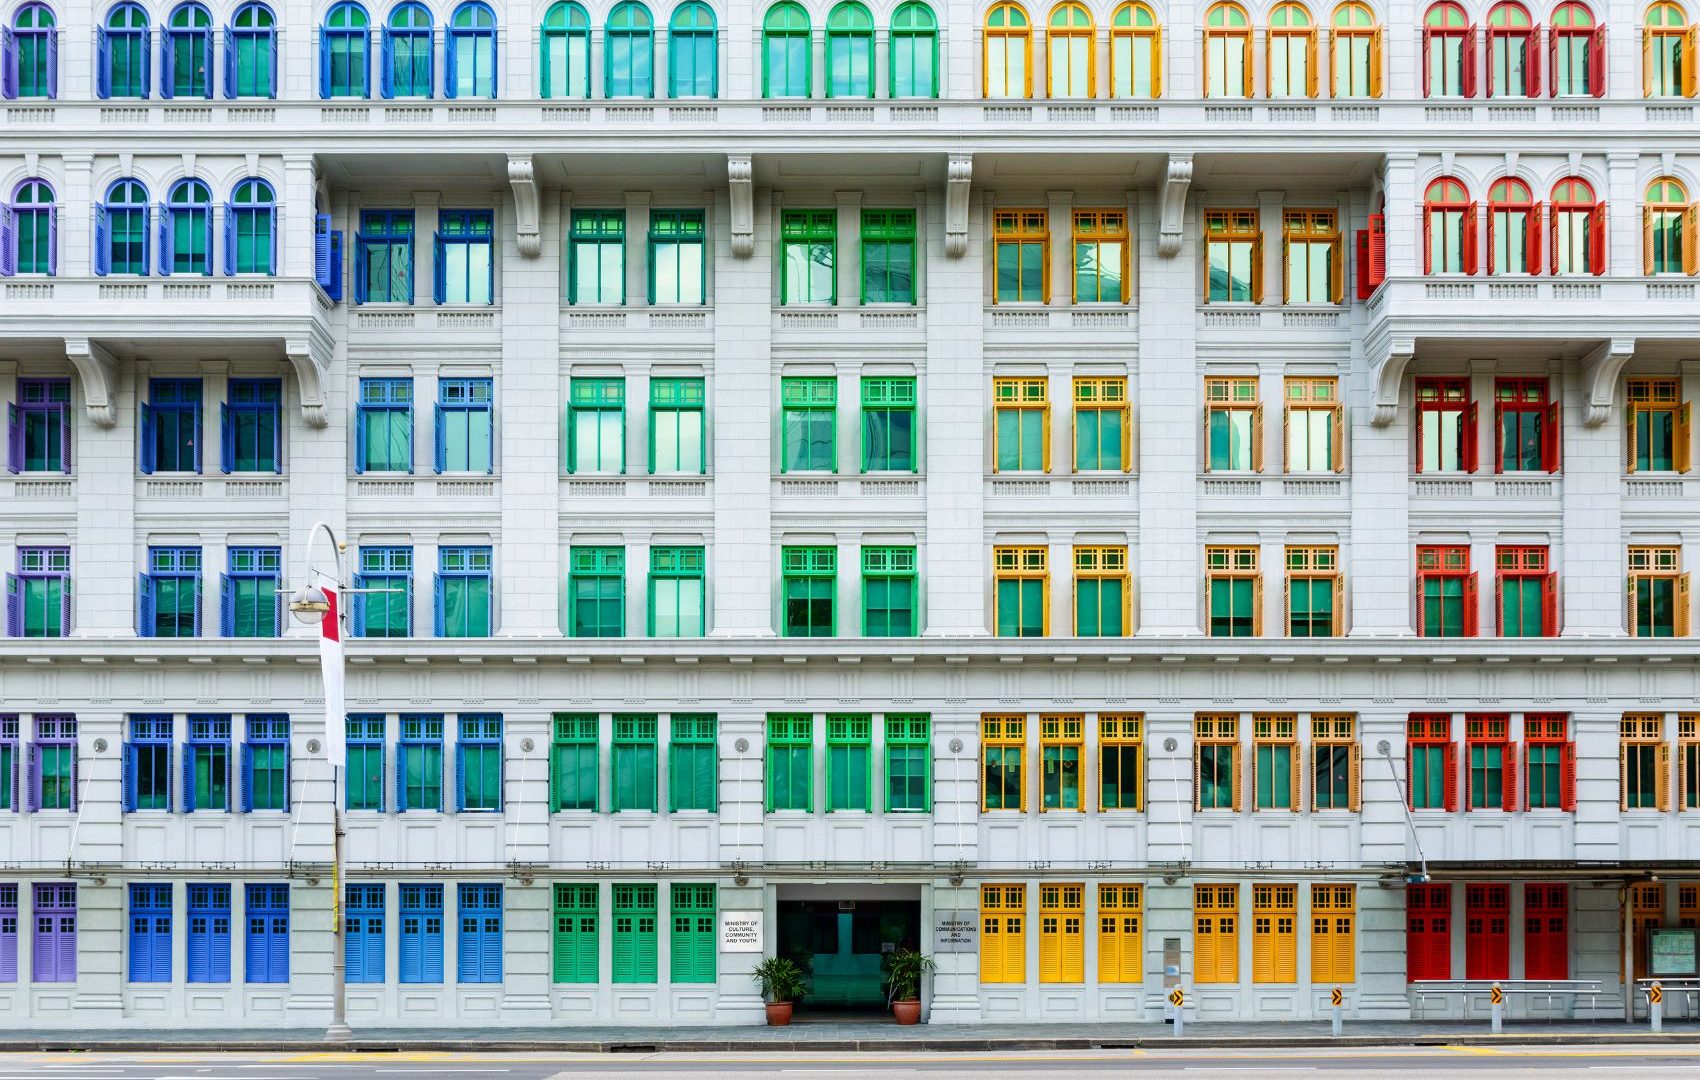 Colorful building in Singapore